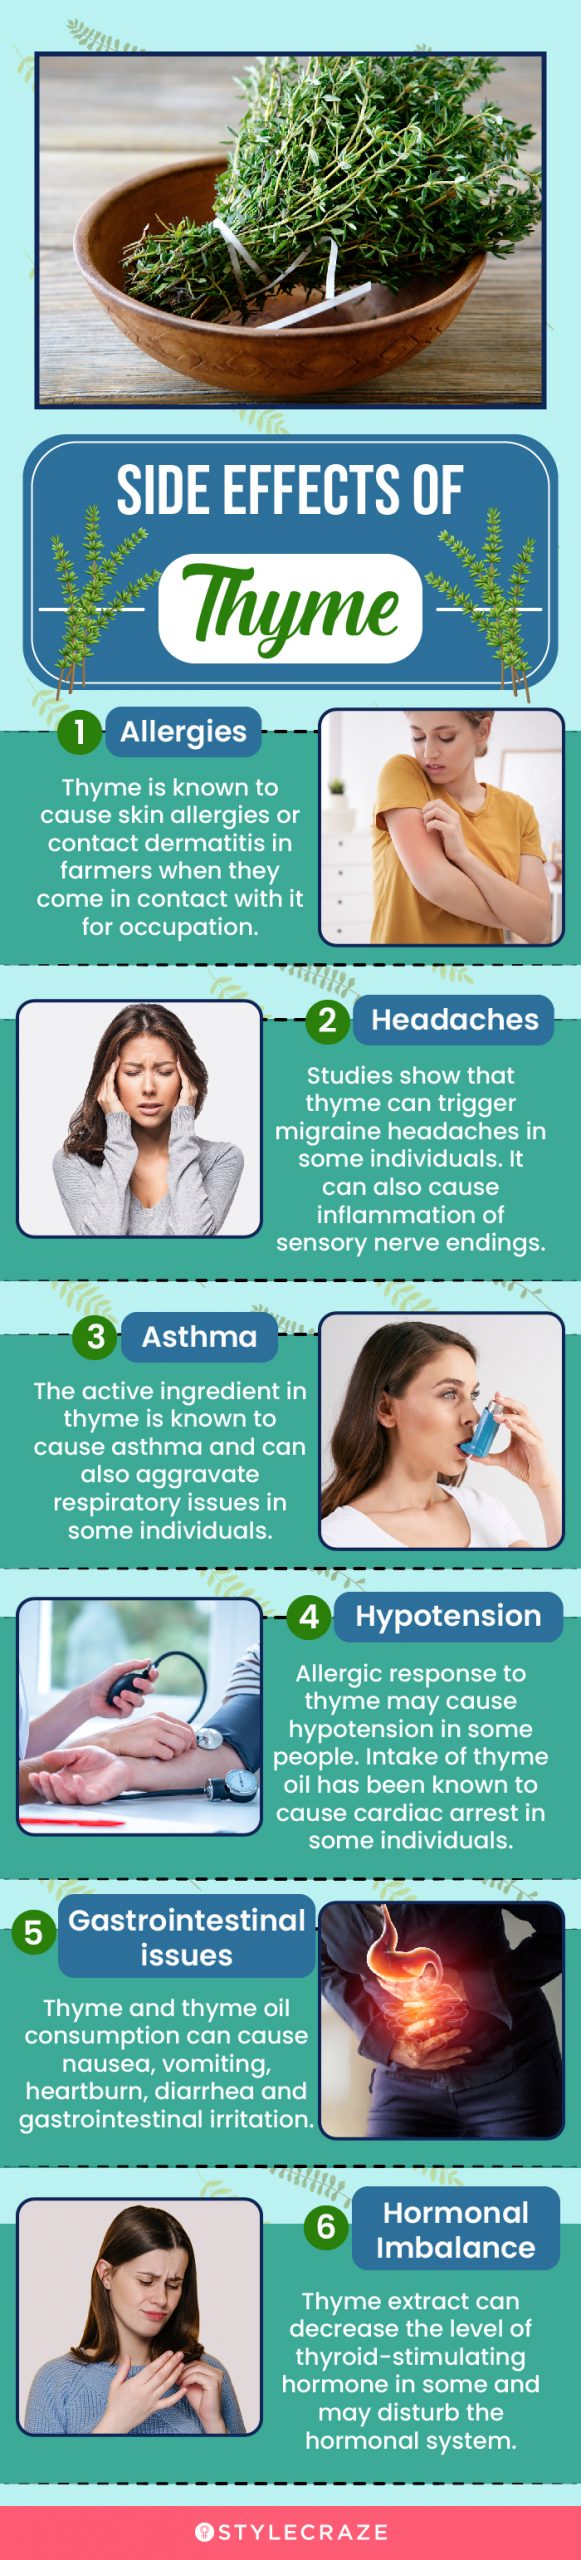 side effects of thyme (infographic)